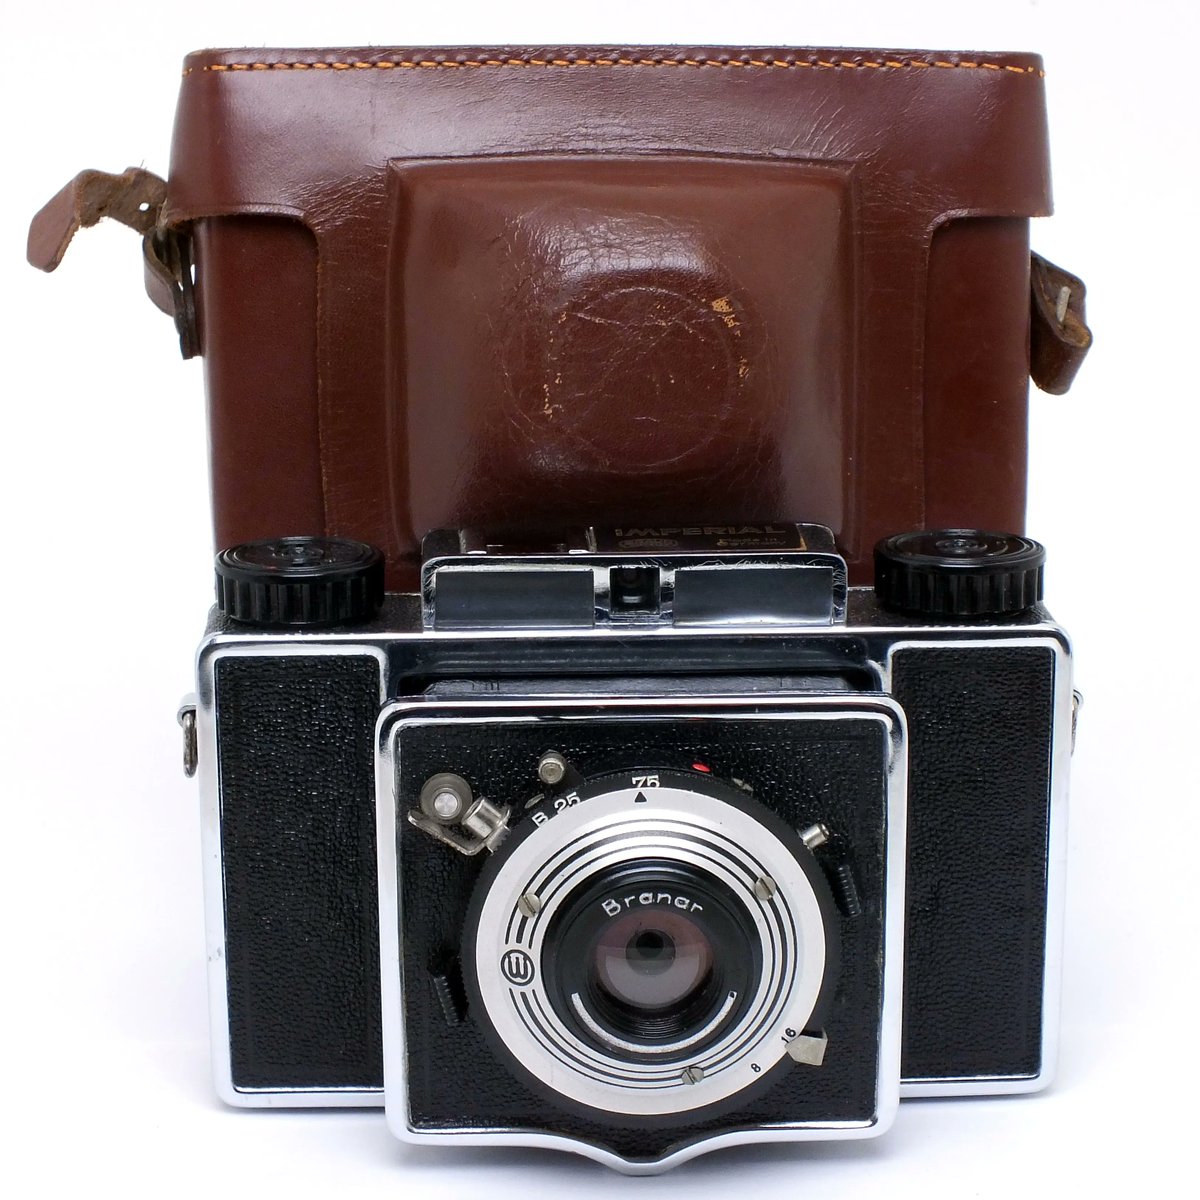 This rare Braun Imperial medium format 6x6 camera is in good condition and now available in our eBay store! ebay.de/itm/3548323445… #camera #photography #analogphotography #vintage #vintagecamera #braun #imperial #viewfinder #mediumformat #cameraboerse #muelheim #ruhrgebiet